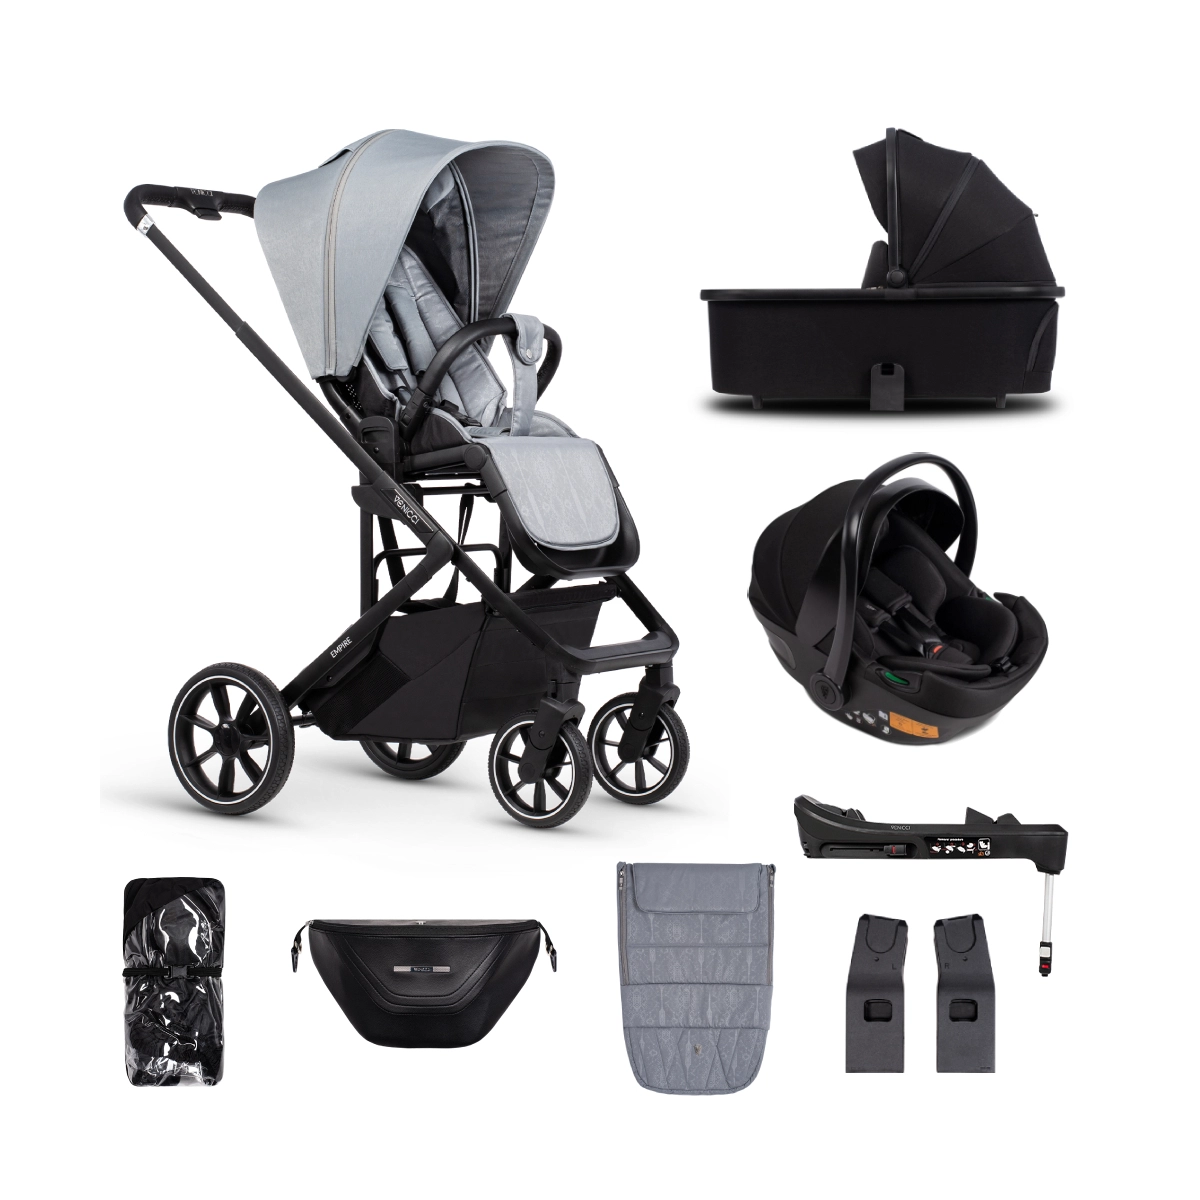 Venicci Empire 3in1 Travel System with Isofix Base